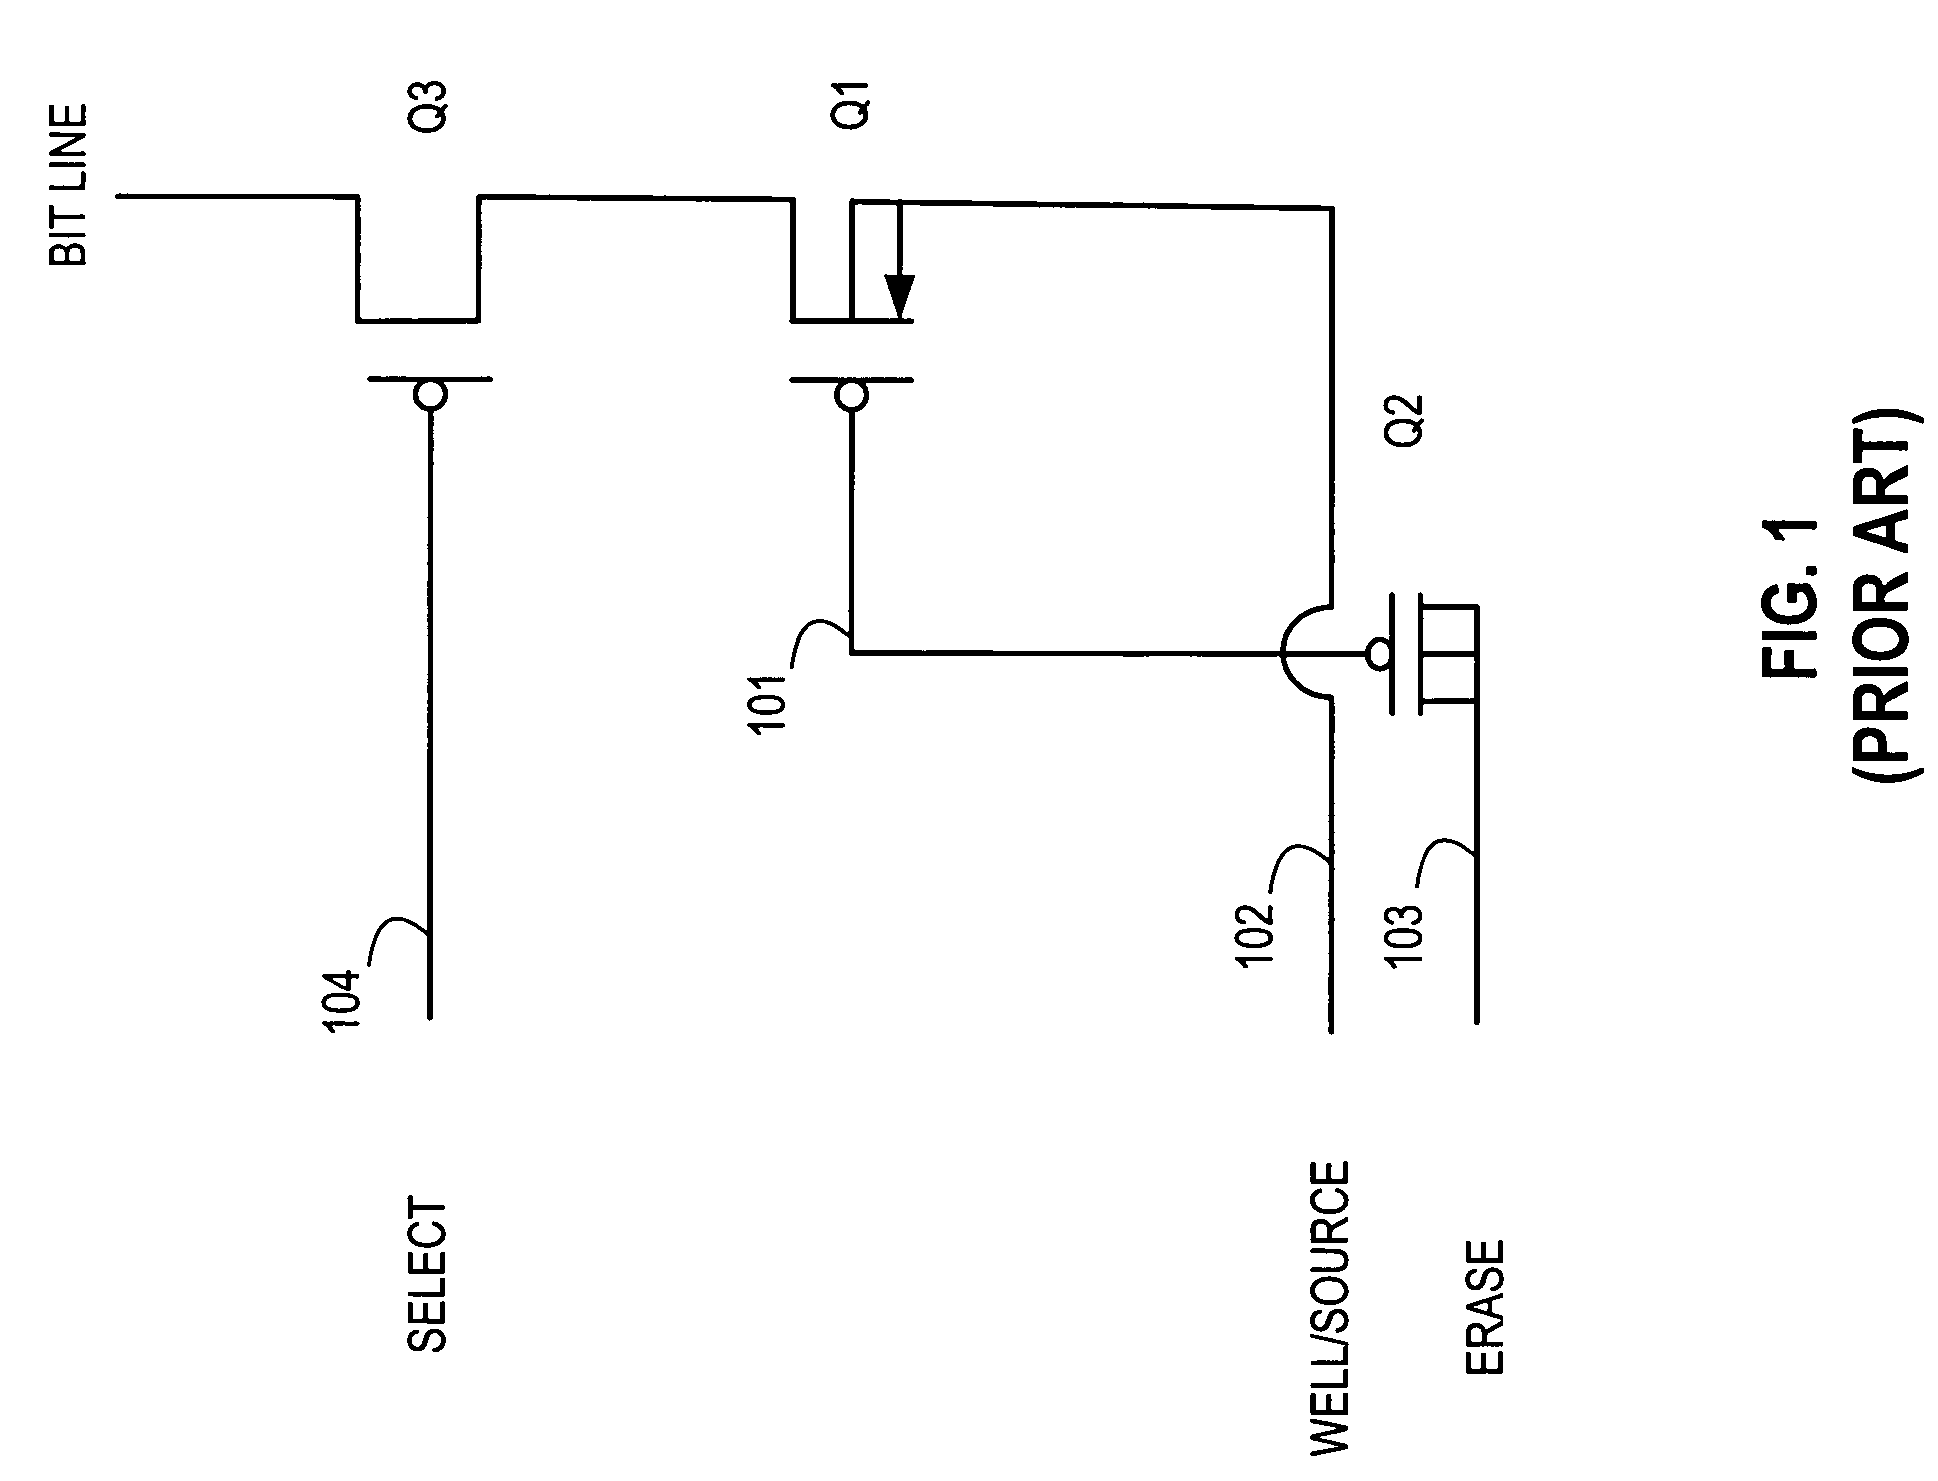 Non-volatile memory with programming through band-to-band tunneling and impact ionization gate current